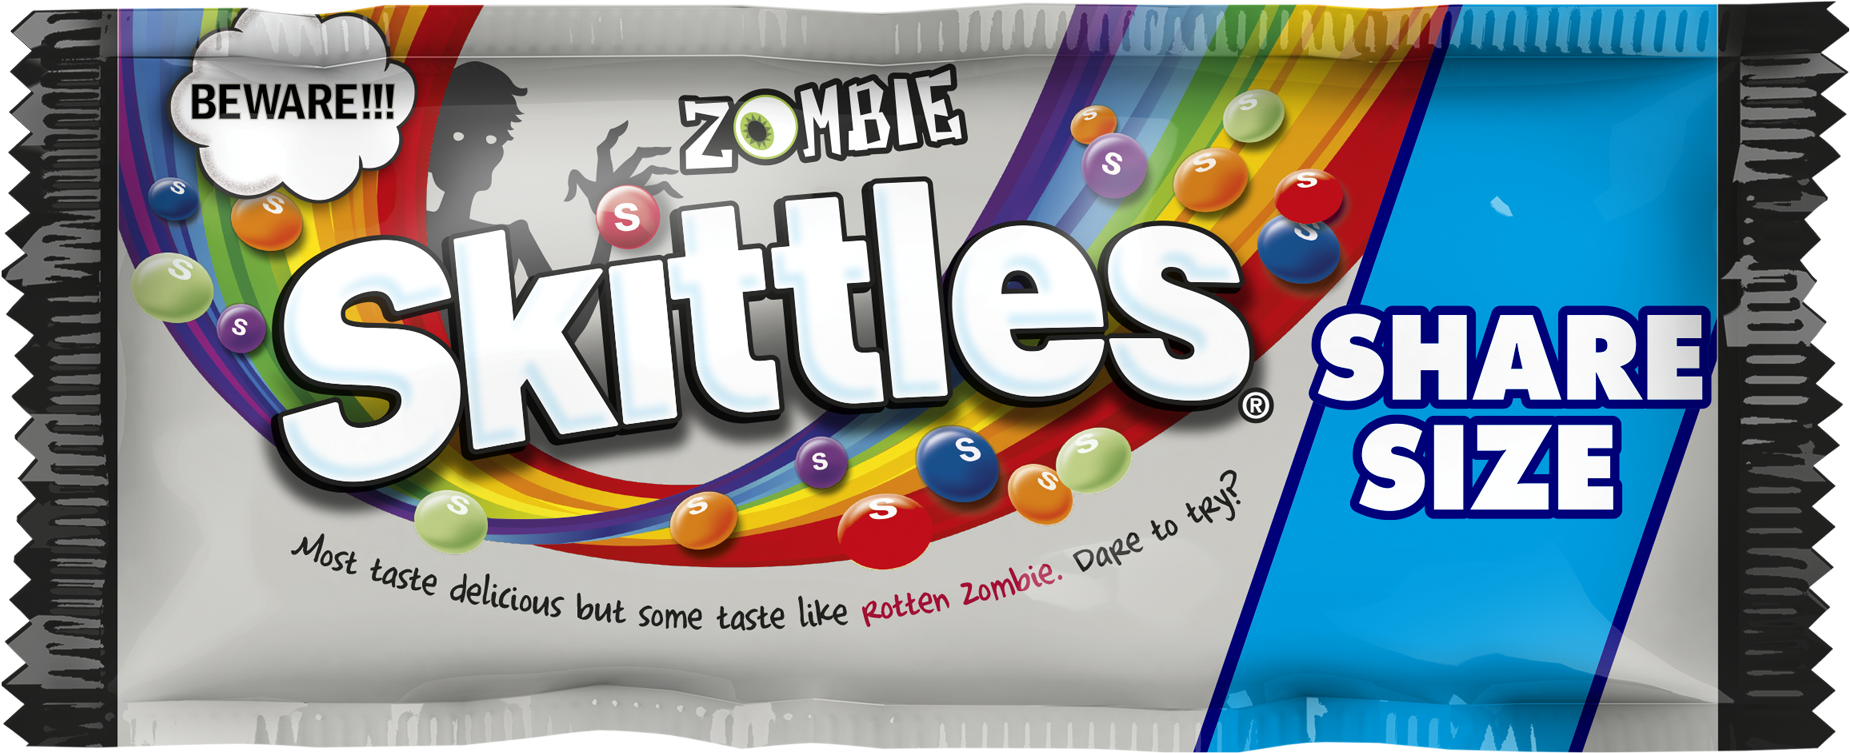 Zombie Skittles Share Size Package PNG image